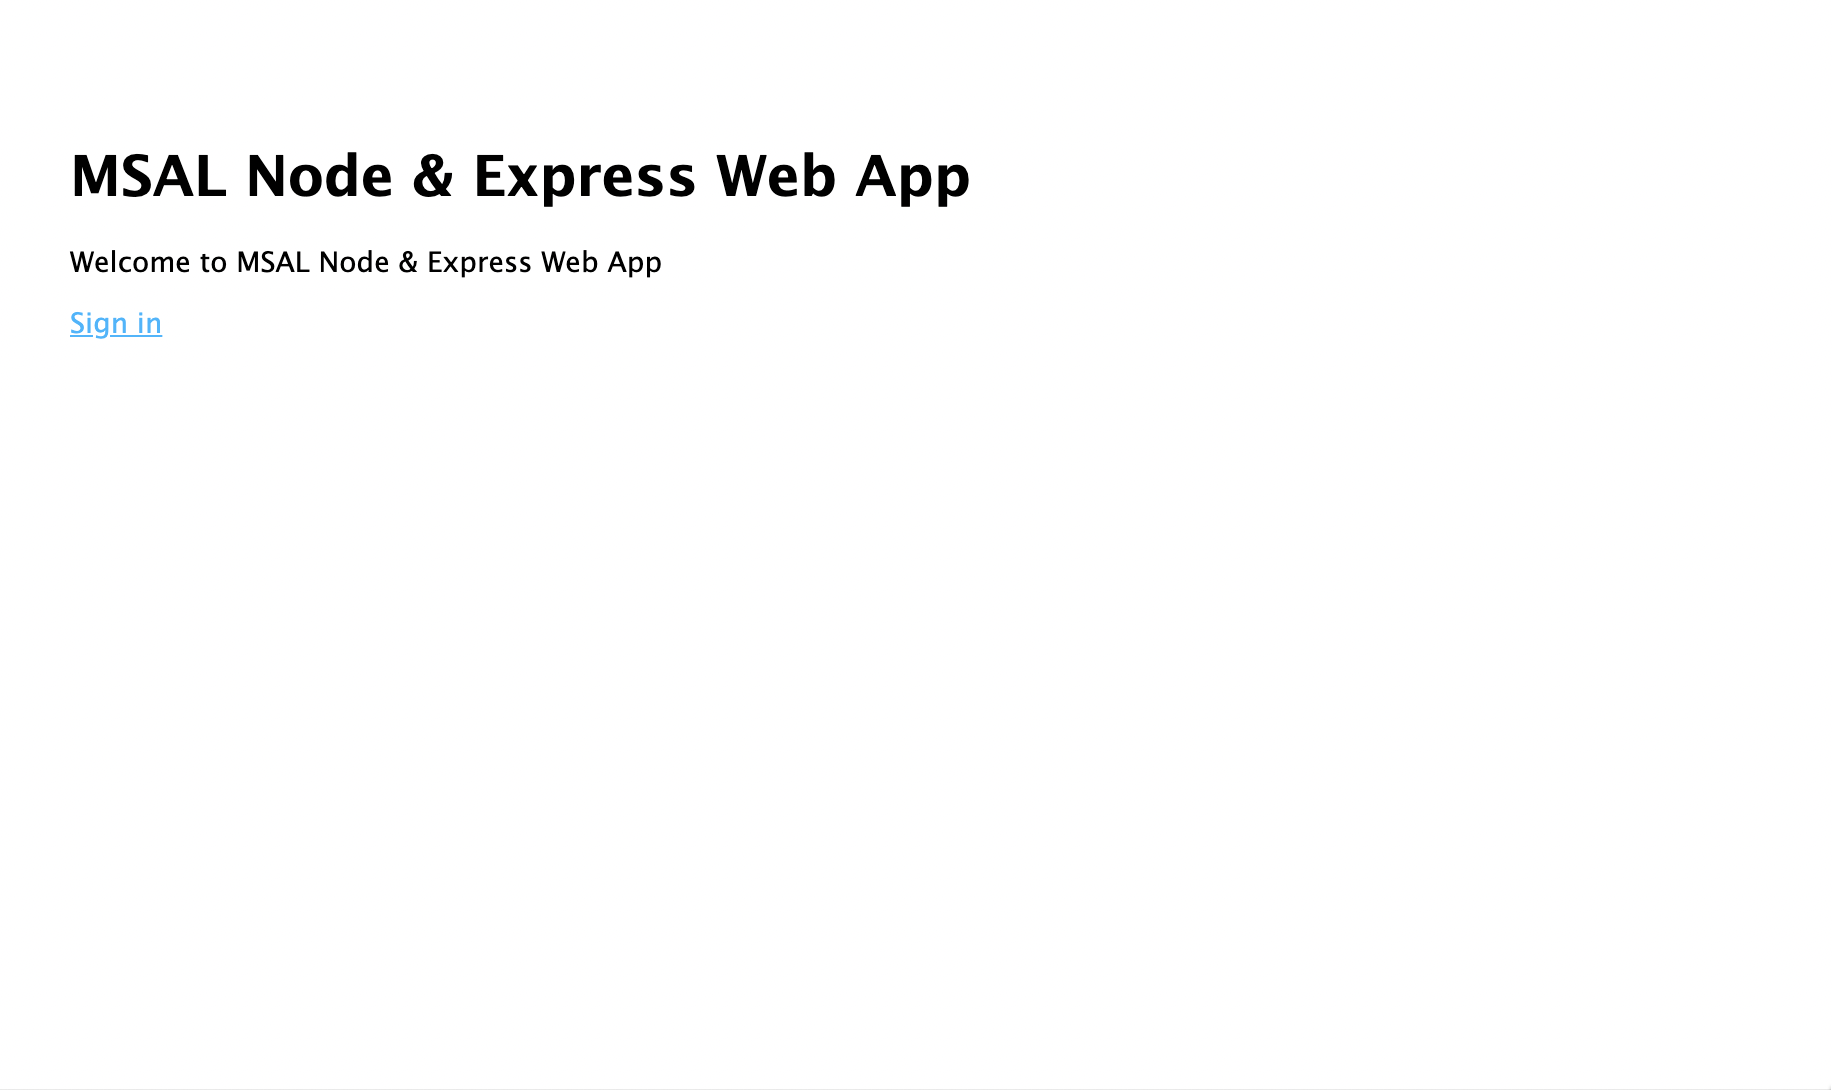 Web app welcome page displaying